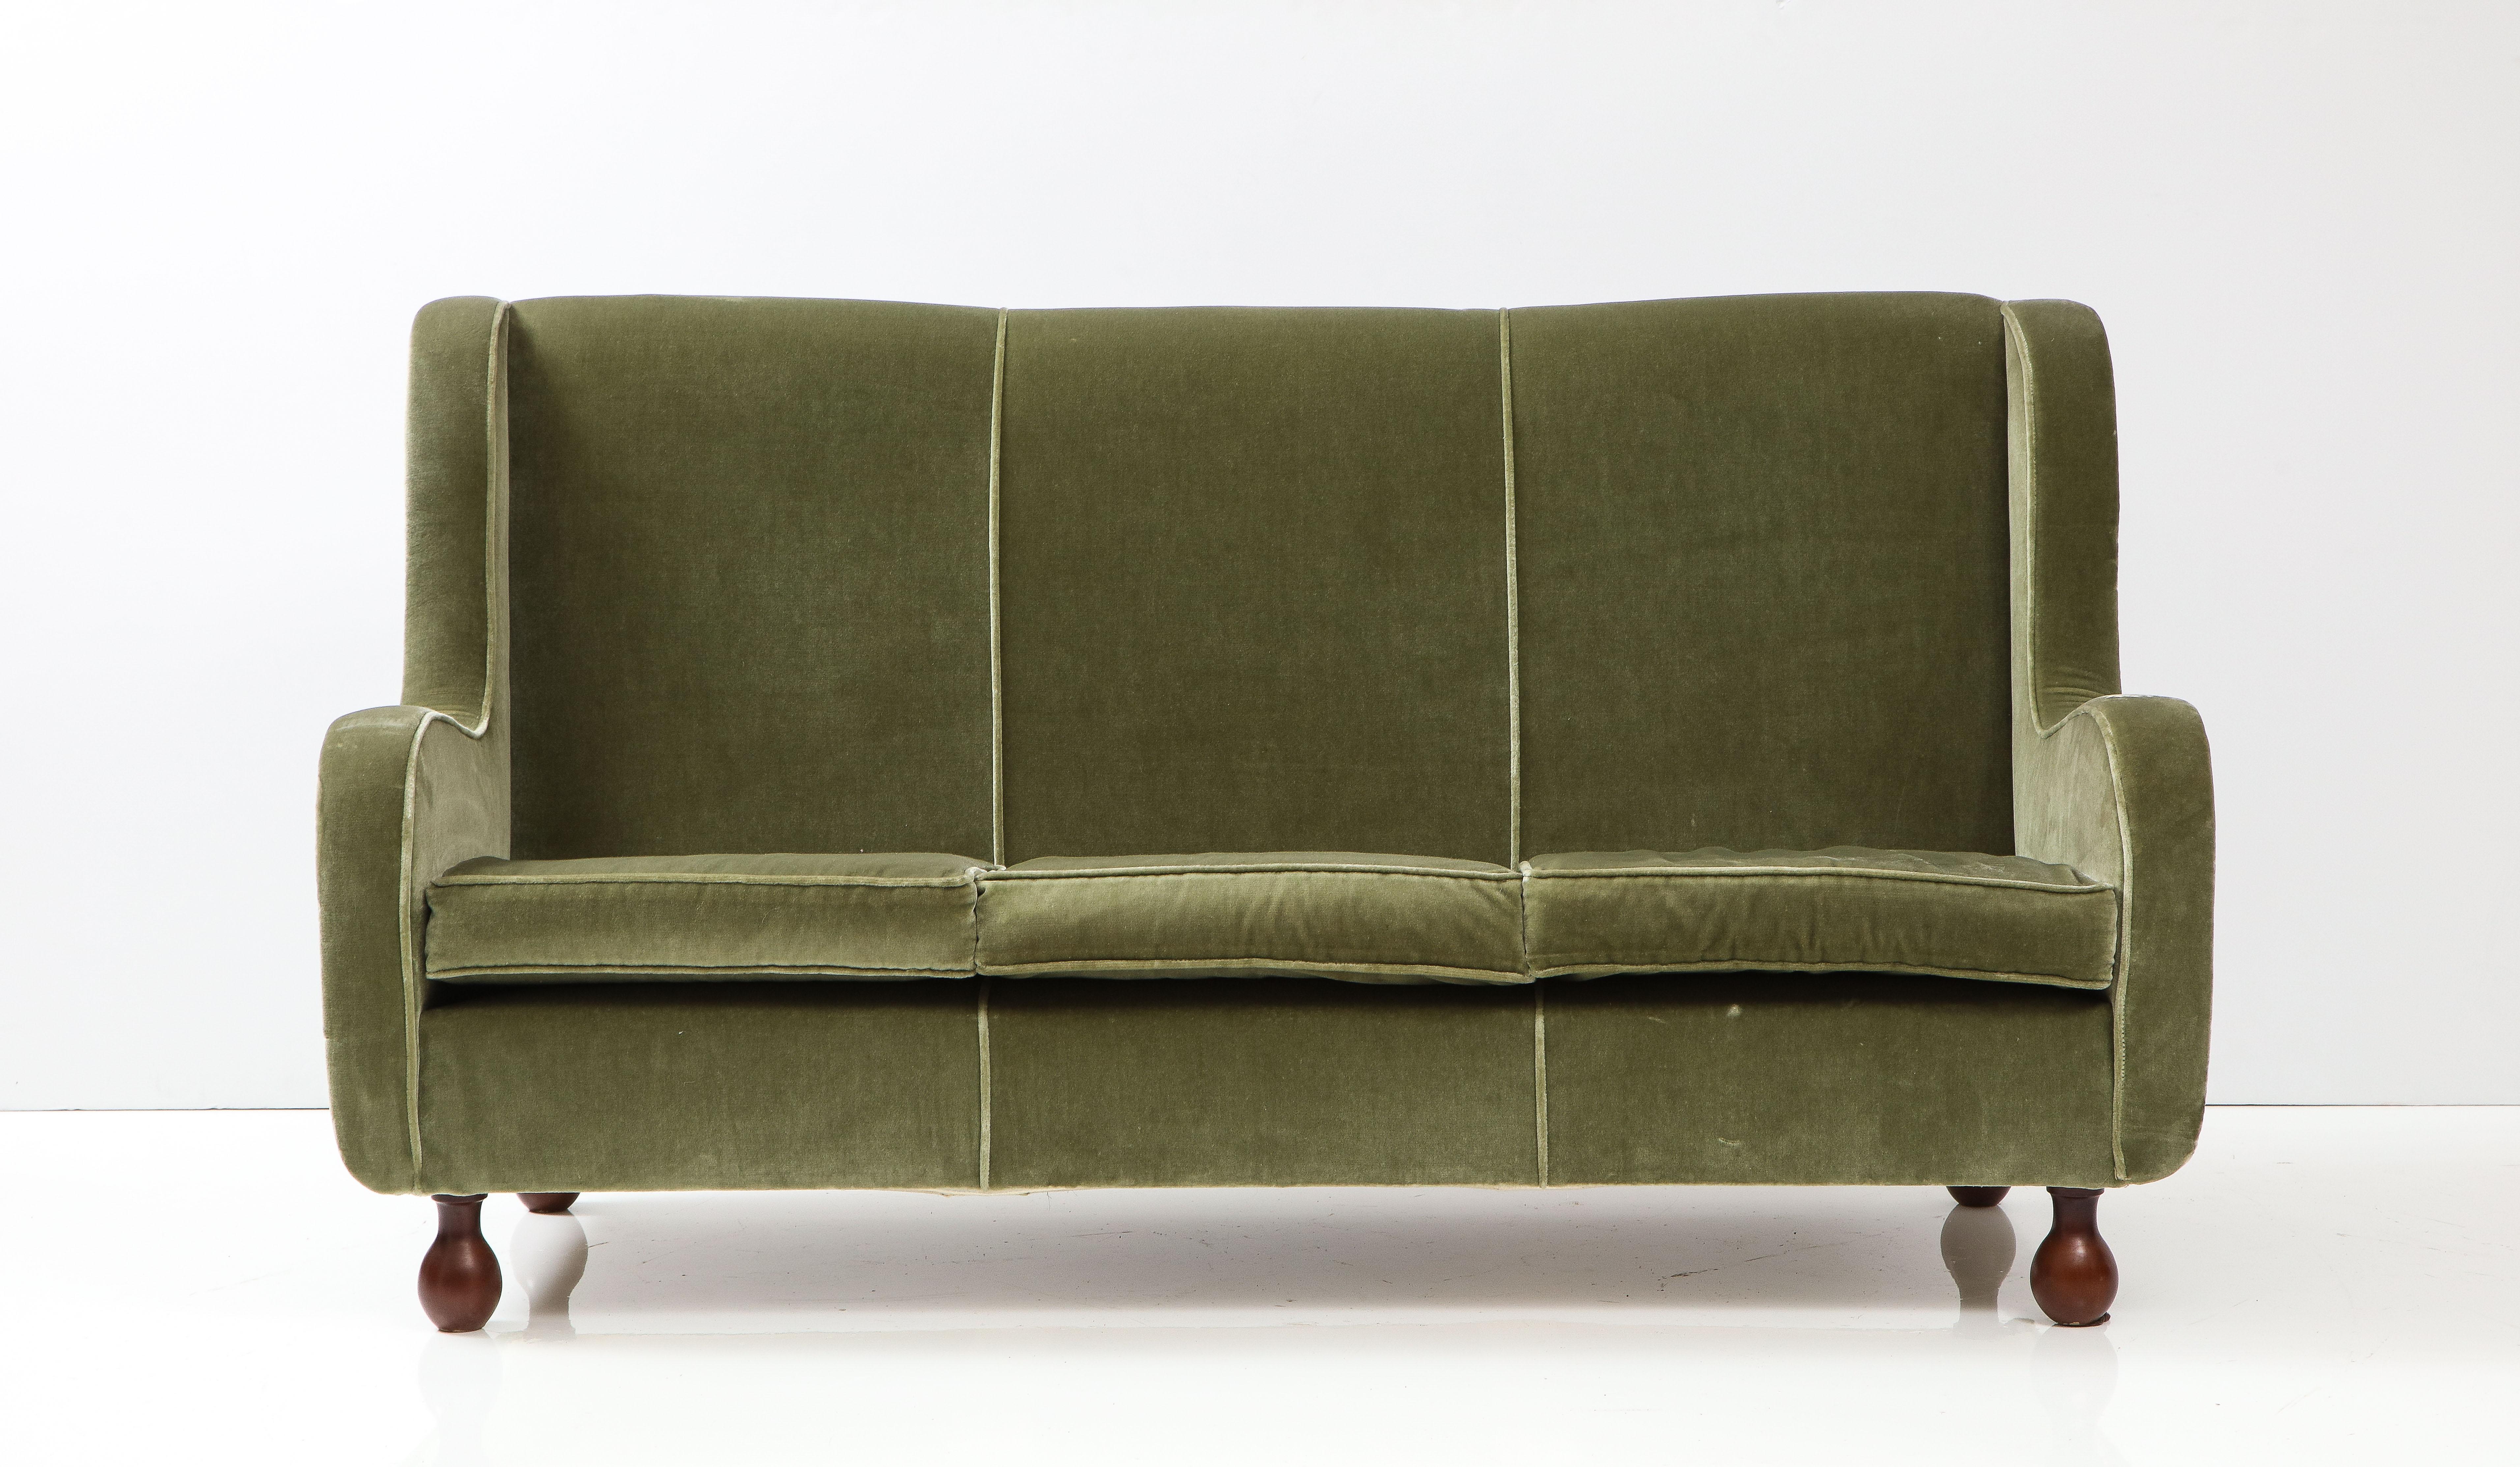 A charming Italian 1940's sofa, upholstered in its original seafoam green velvet, with beautifully curved arms, rectangular back; the whole supported on walnut bun feet. Also available: a pair of slipper chairs and a pair of arm chairs. Inquire